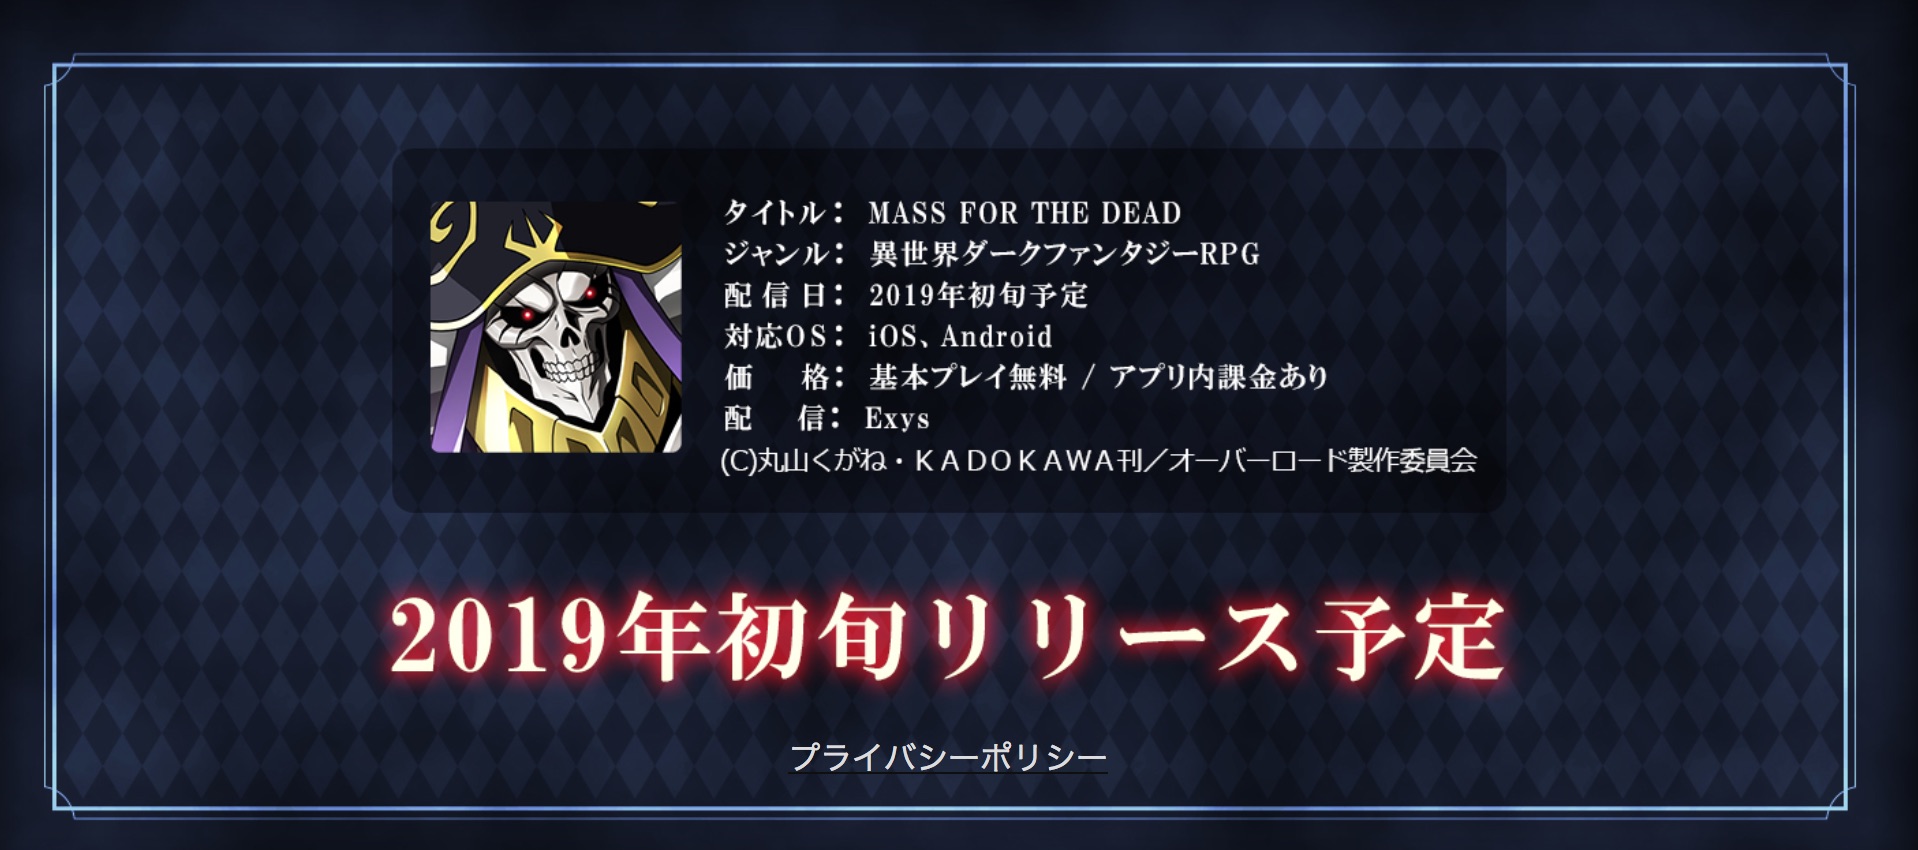 Exys新作《MASS FOR THE DEAD》推迟至2019年初发布 2